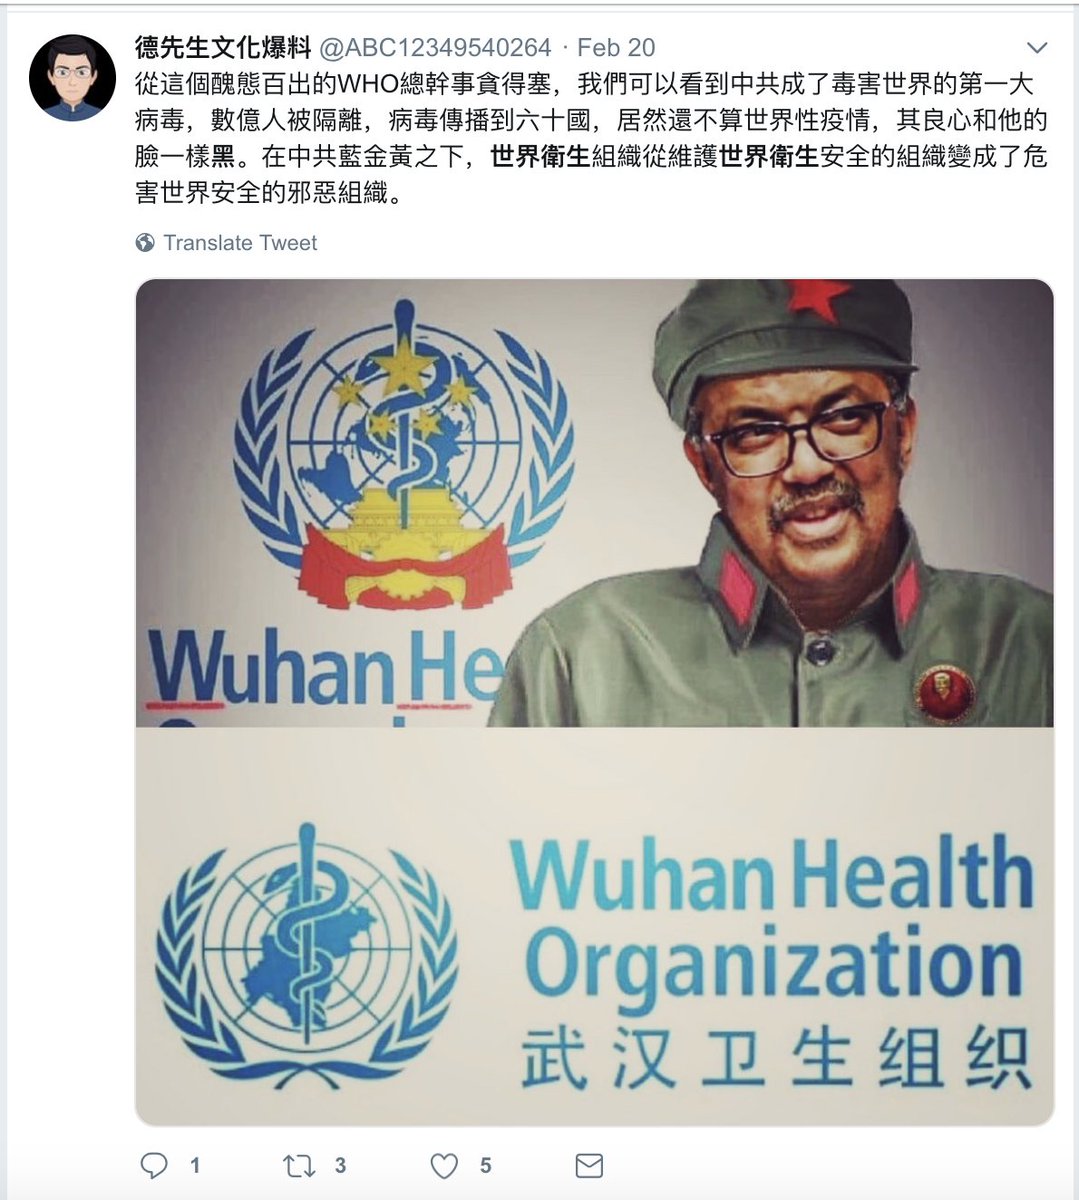 Here's an ex. from 02/20 that calls Tedros ugly & his conscience as dark as his face: "從這個醜態百出的WHO總幹事貪得塞...其良心和他的臉一樣黑".  https://twitter.com/ABC12349540264/status/1230499578903965697 But the account is a) anonymous & b) usually writes in simplified Chinese (see the 'birthdate' 06/04/1989!) 3/